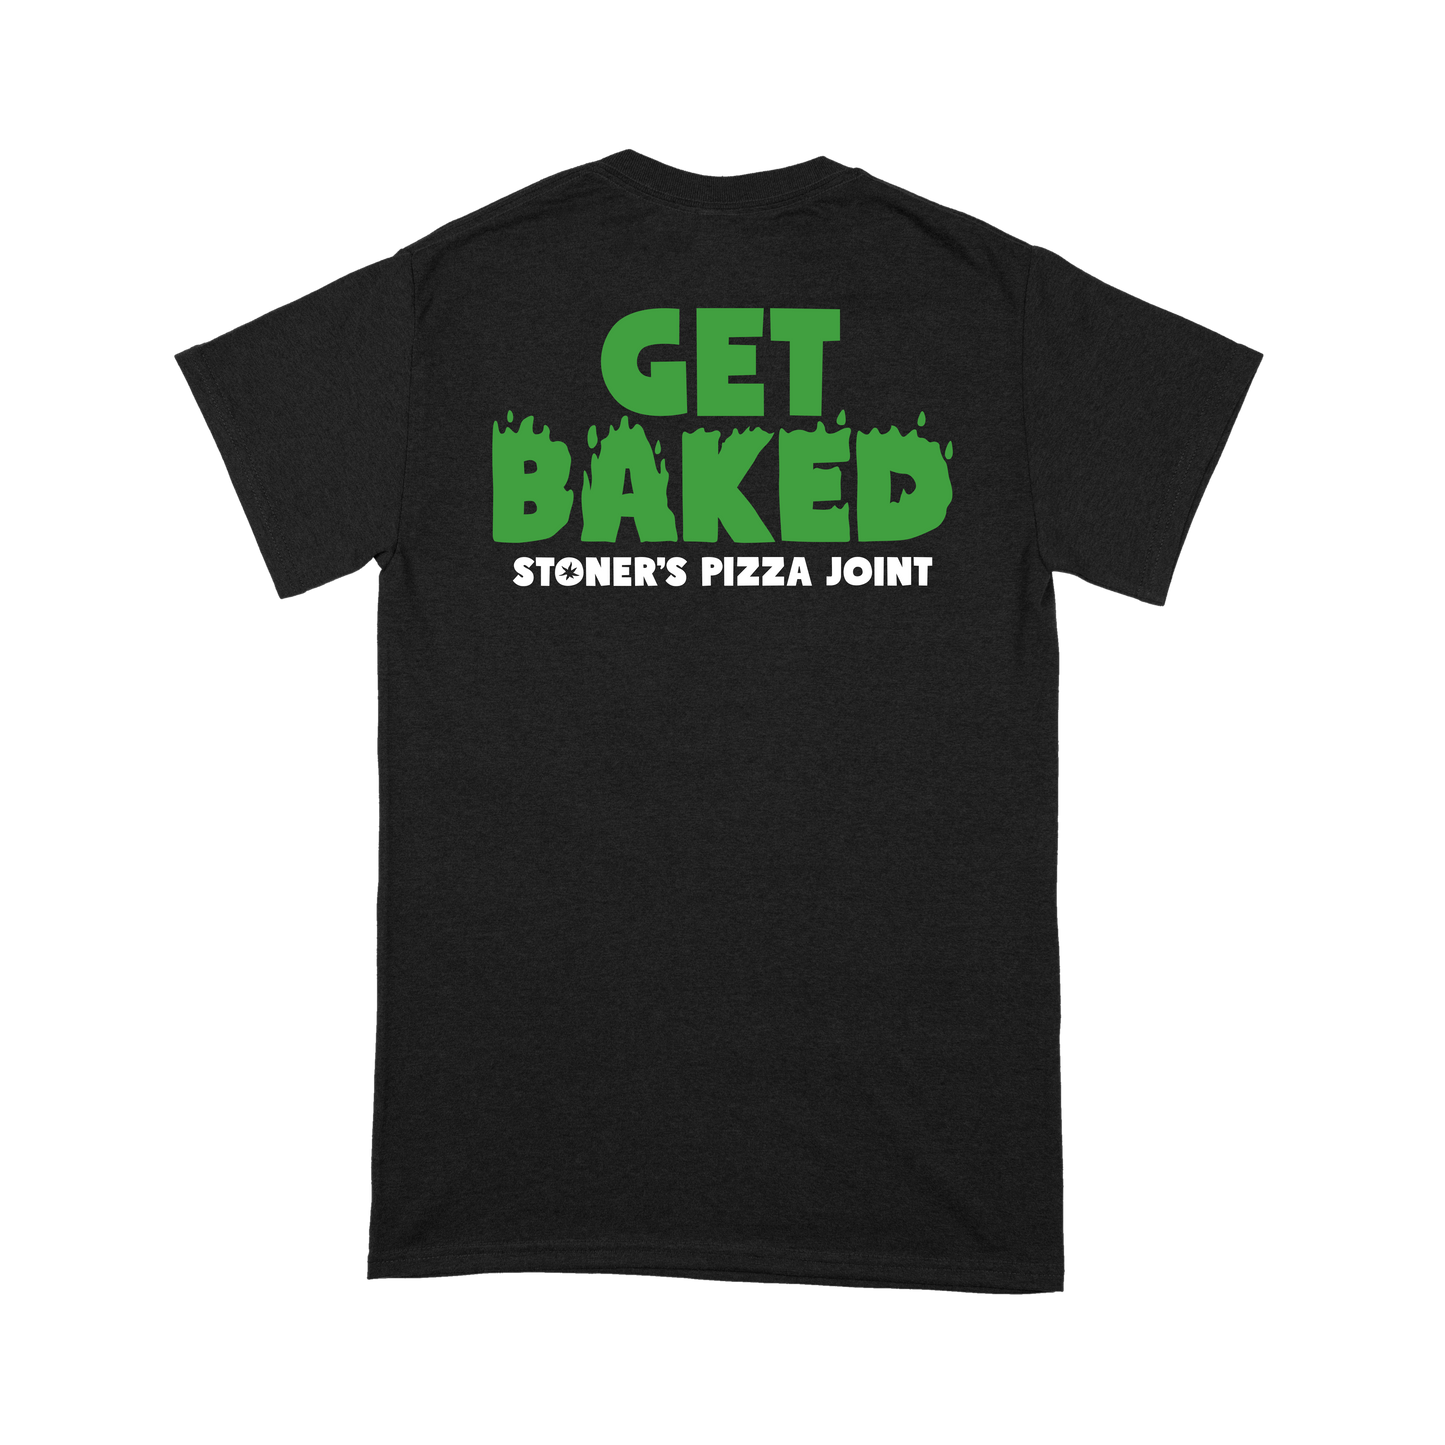 Stoner's Pizza Joint - Get Baked T-Shirt